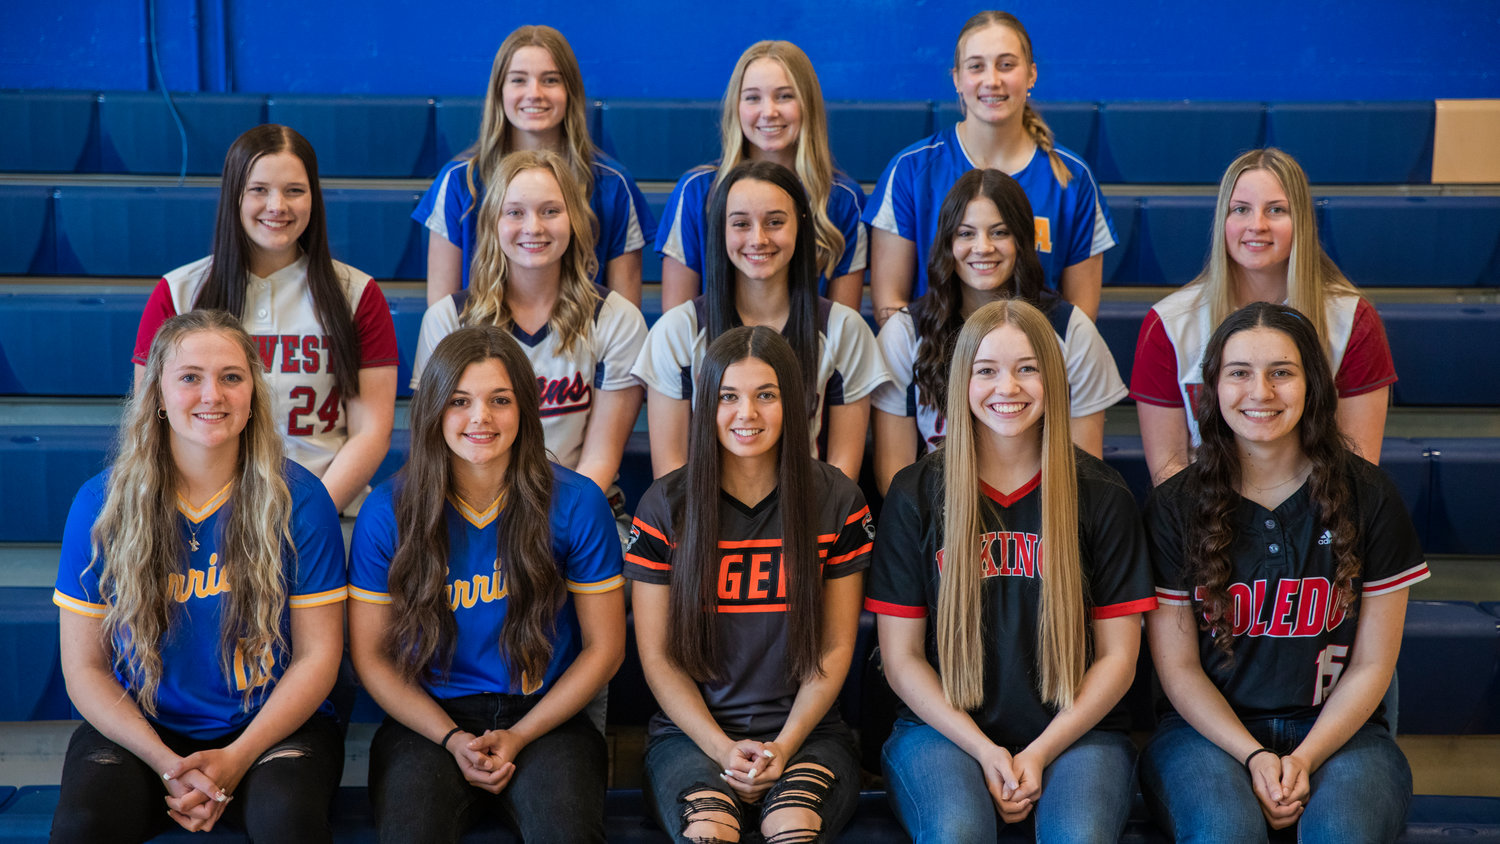 All-area athletes pose for a photo sporting their high school softball jerseys on Thursday, June 9, 2022. All-area picks not pictured are Rainier’s Bailey Elwell, Tenino’s Emily Baxter, and Onalaska’s Alex Cleveland-Barrera.